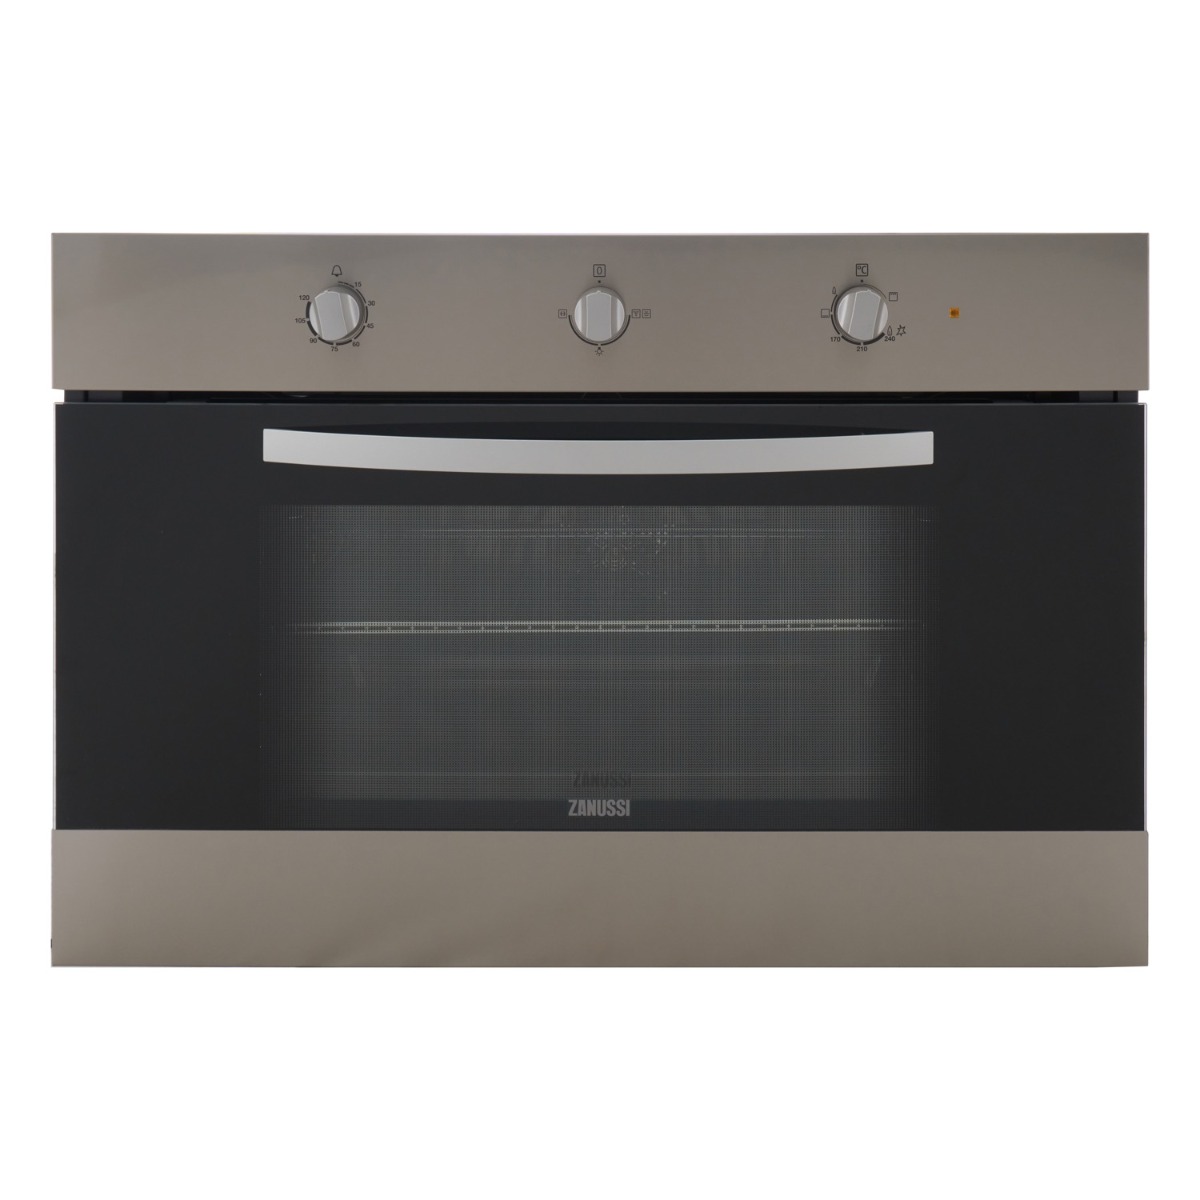 Zanussi Built-in Gas Oven, with Girll, 74  Liters, Stainless Steel- ZOG9991X